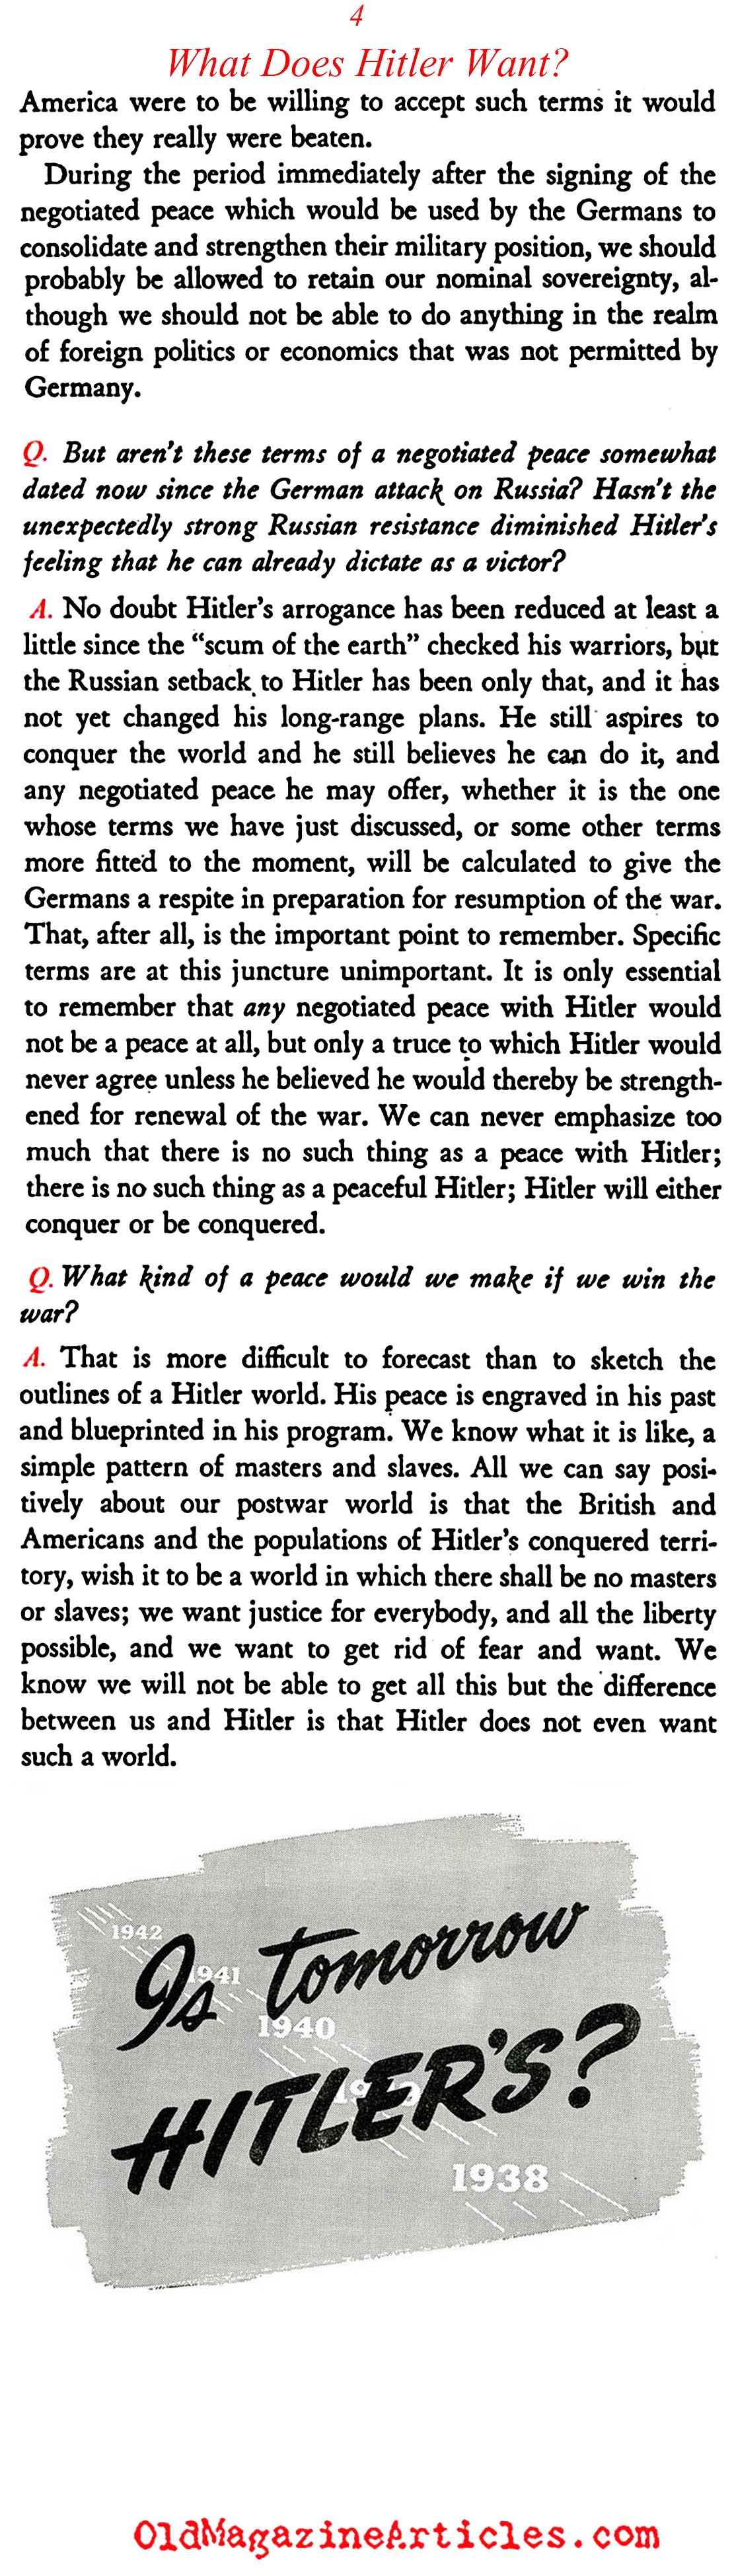 Germany's Dictated Peace Terms for the World (Omnibooks Digest, 1942)